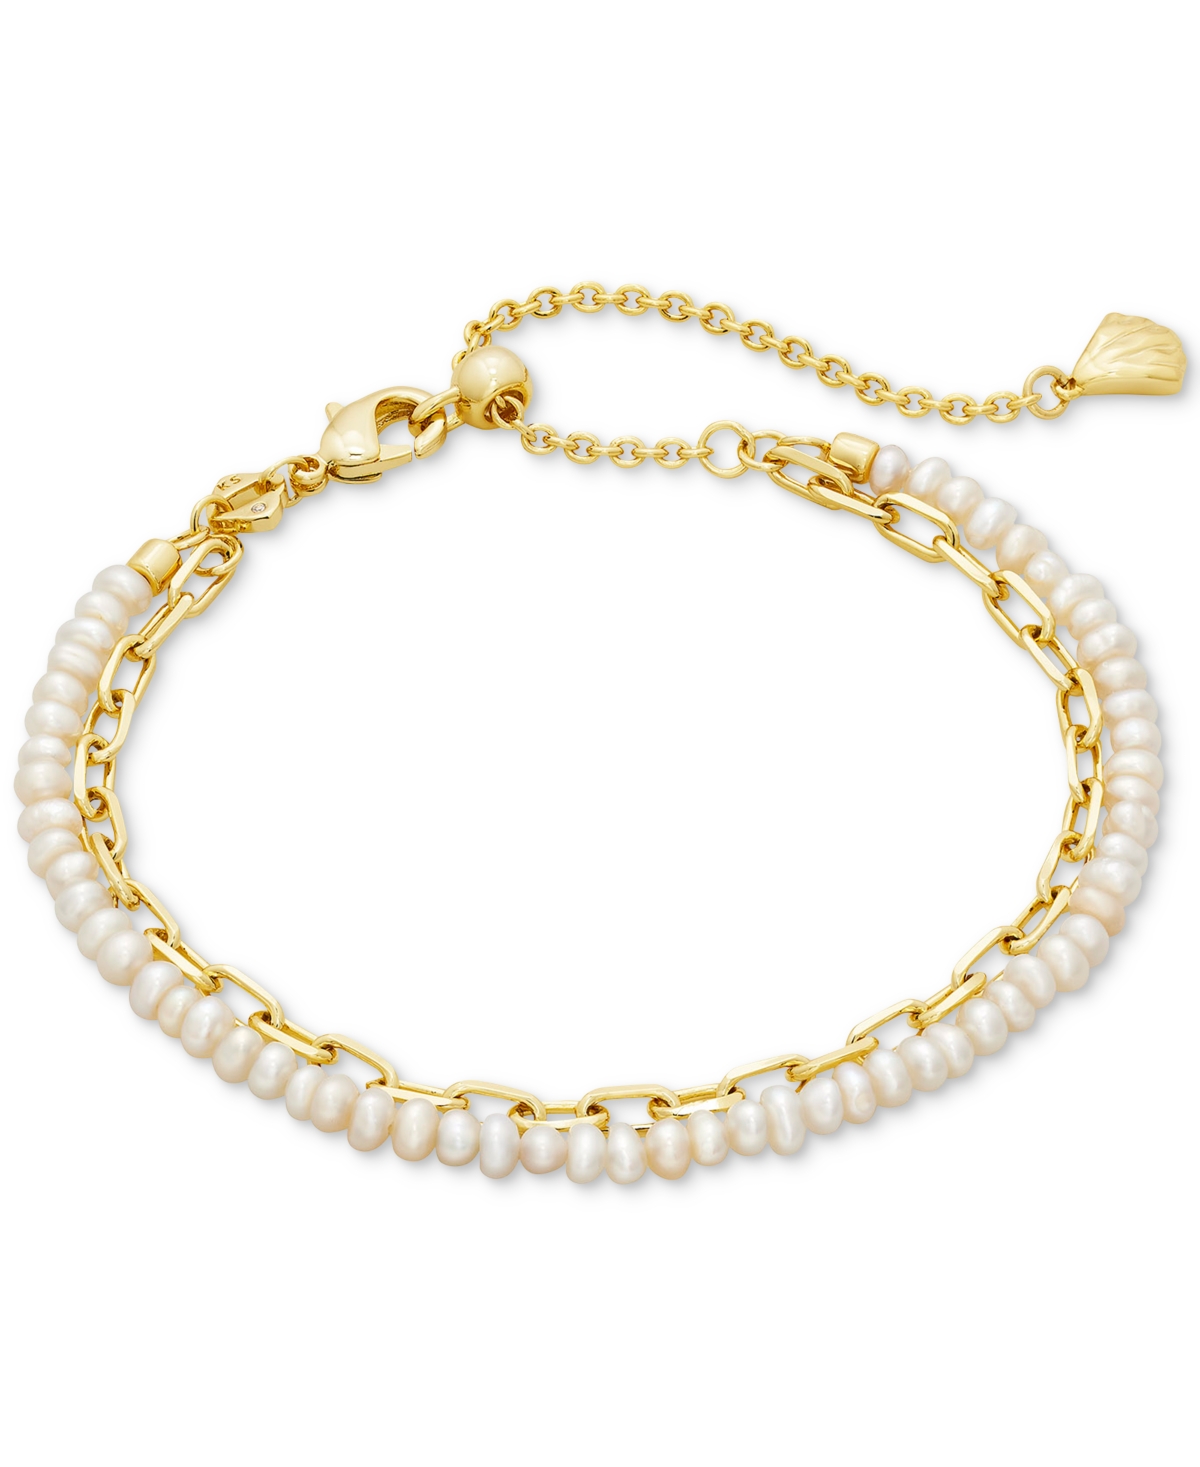 14k Gold-Plated Chain Link & Cultured Freshwater Pearl Double-Row Slider Bracelet - Gold White